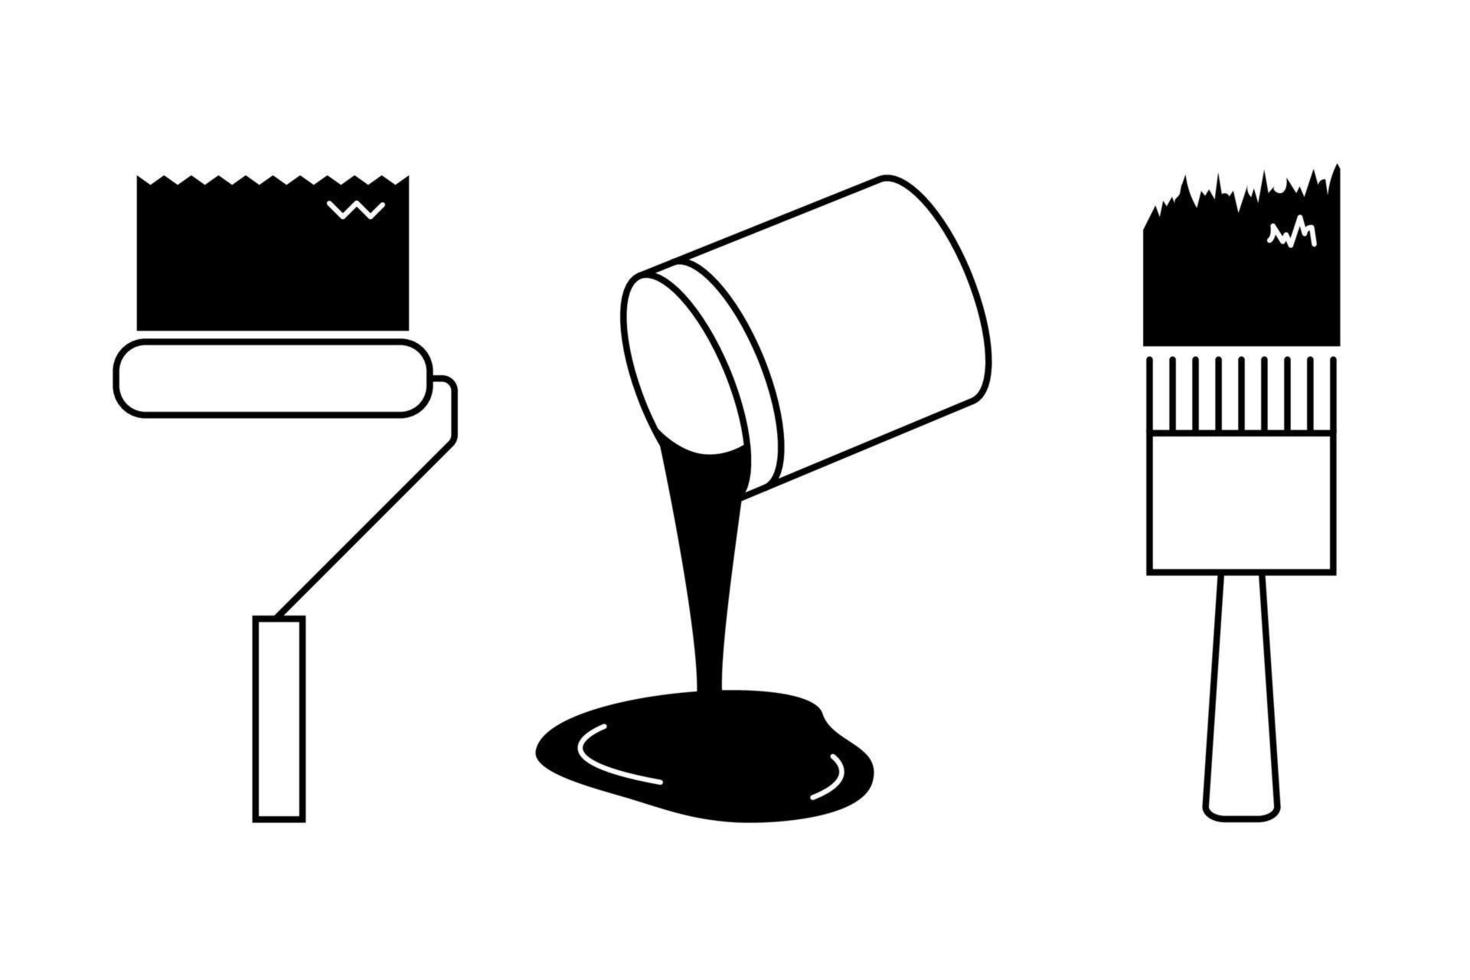 Painting tools. Set of outline icons. Vector illustration. Linear drawing of painting brush and roller and can with spilling paint.